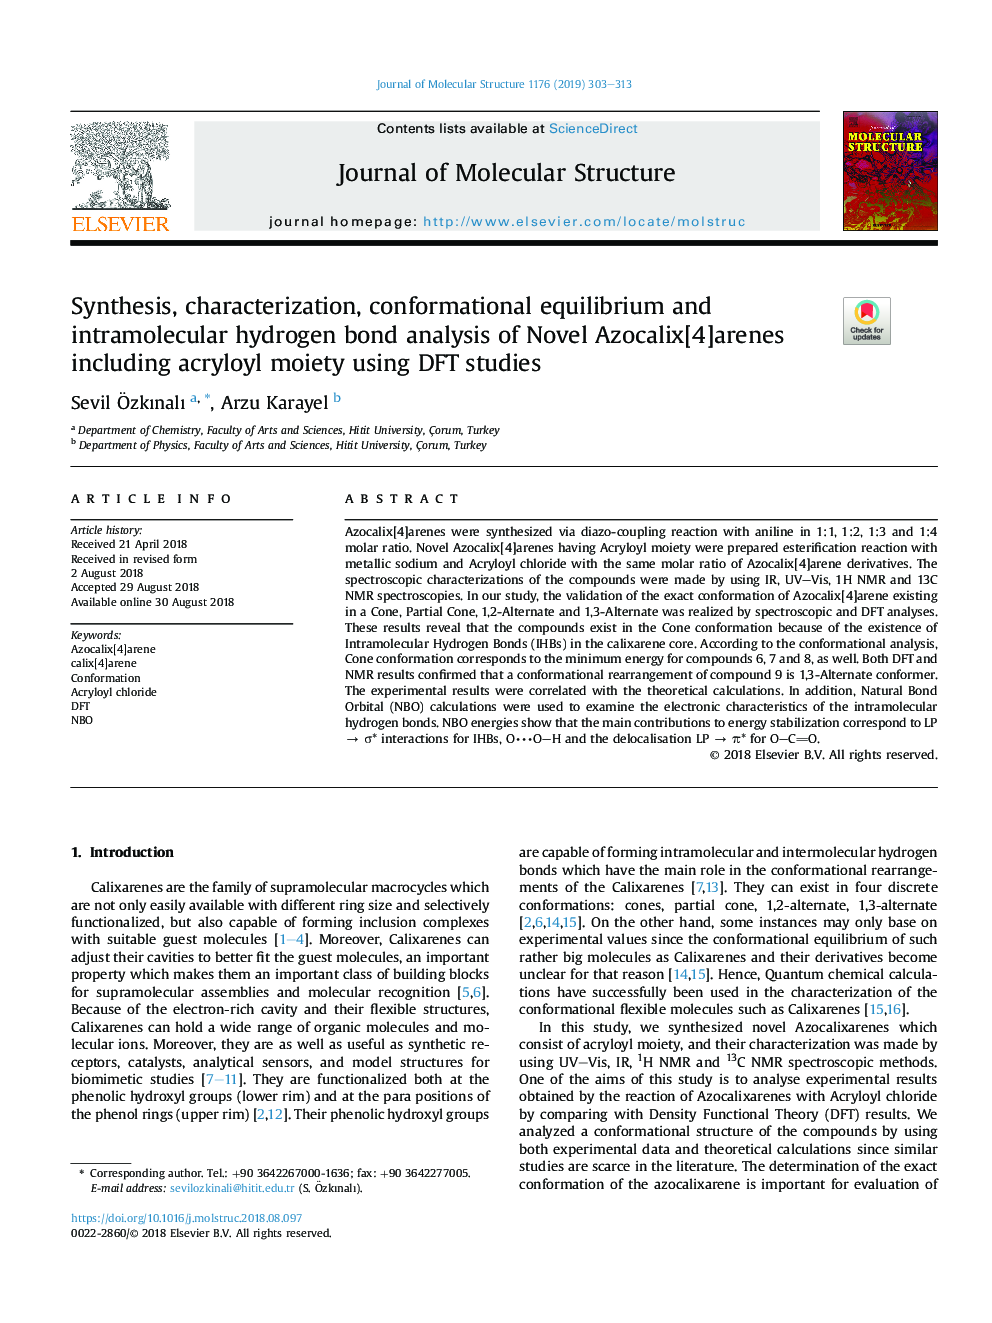 Synthesis, characterization, conformational equilibrium and intramolecular hydrogen bond analysis of Novel Azocalix[4]arenes including acryloyl moiety using DFT studies